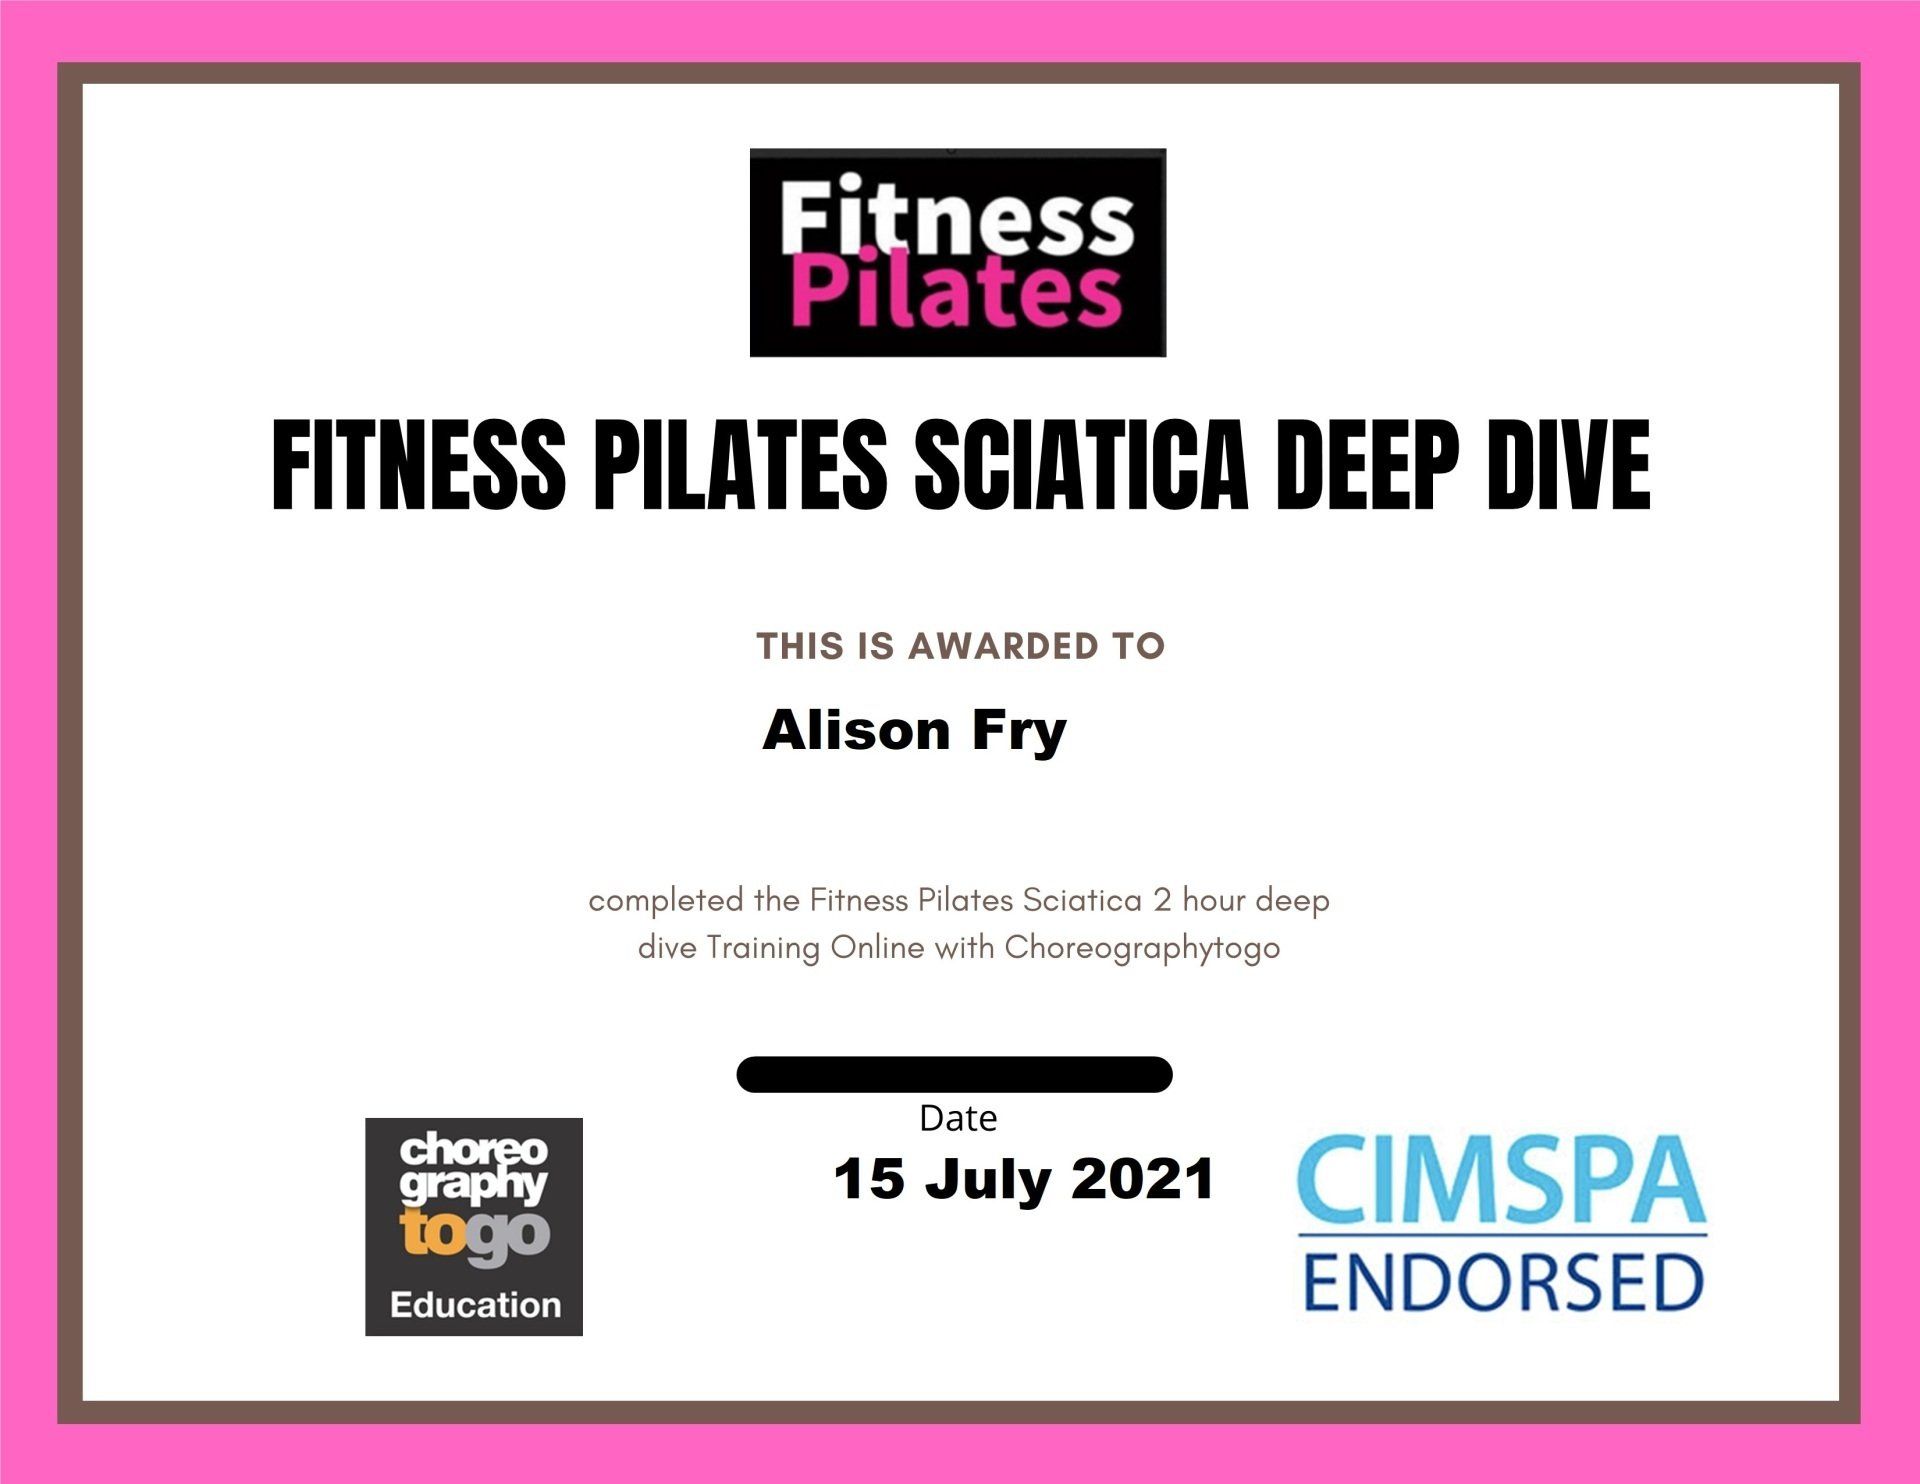 Fitness Pilates Sciatica Deep Dive Certification  - 15th July 2021